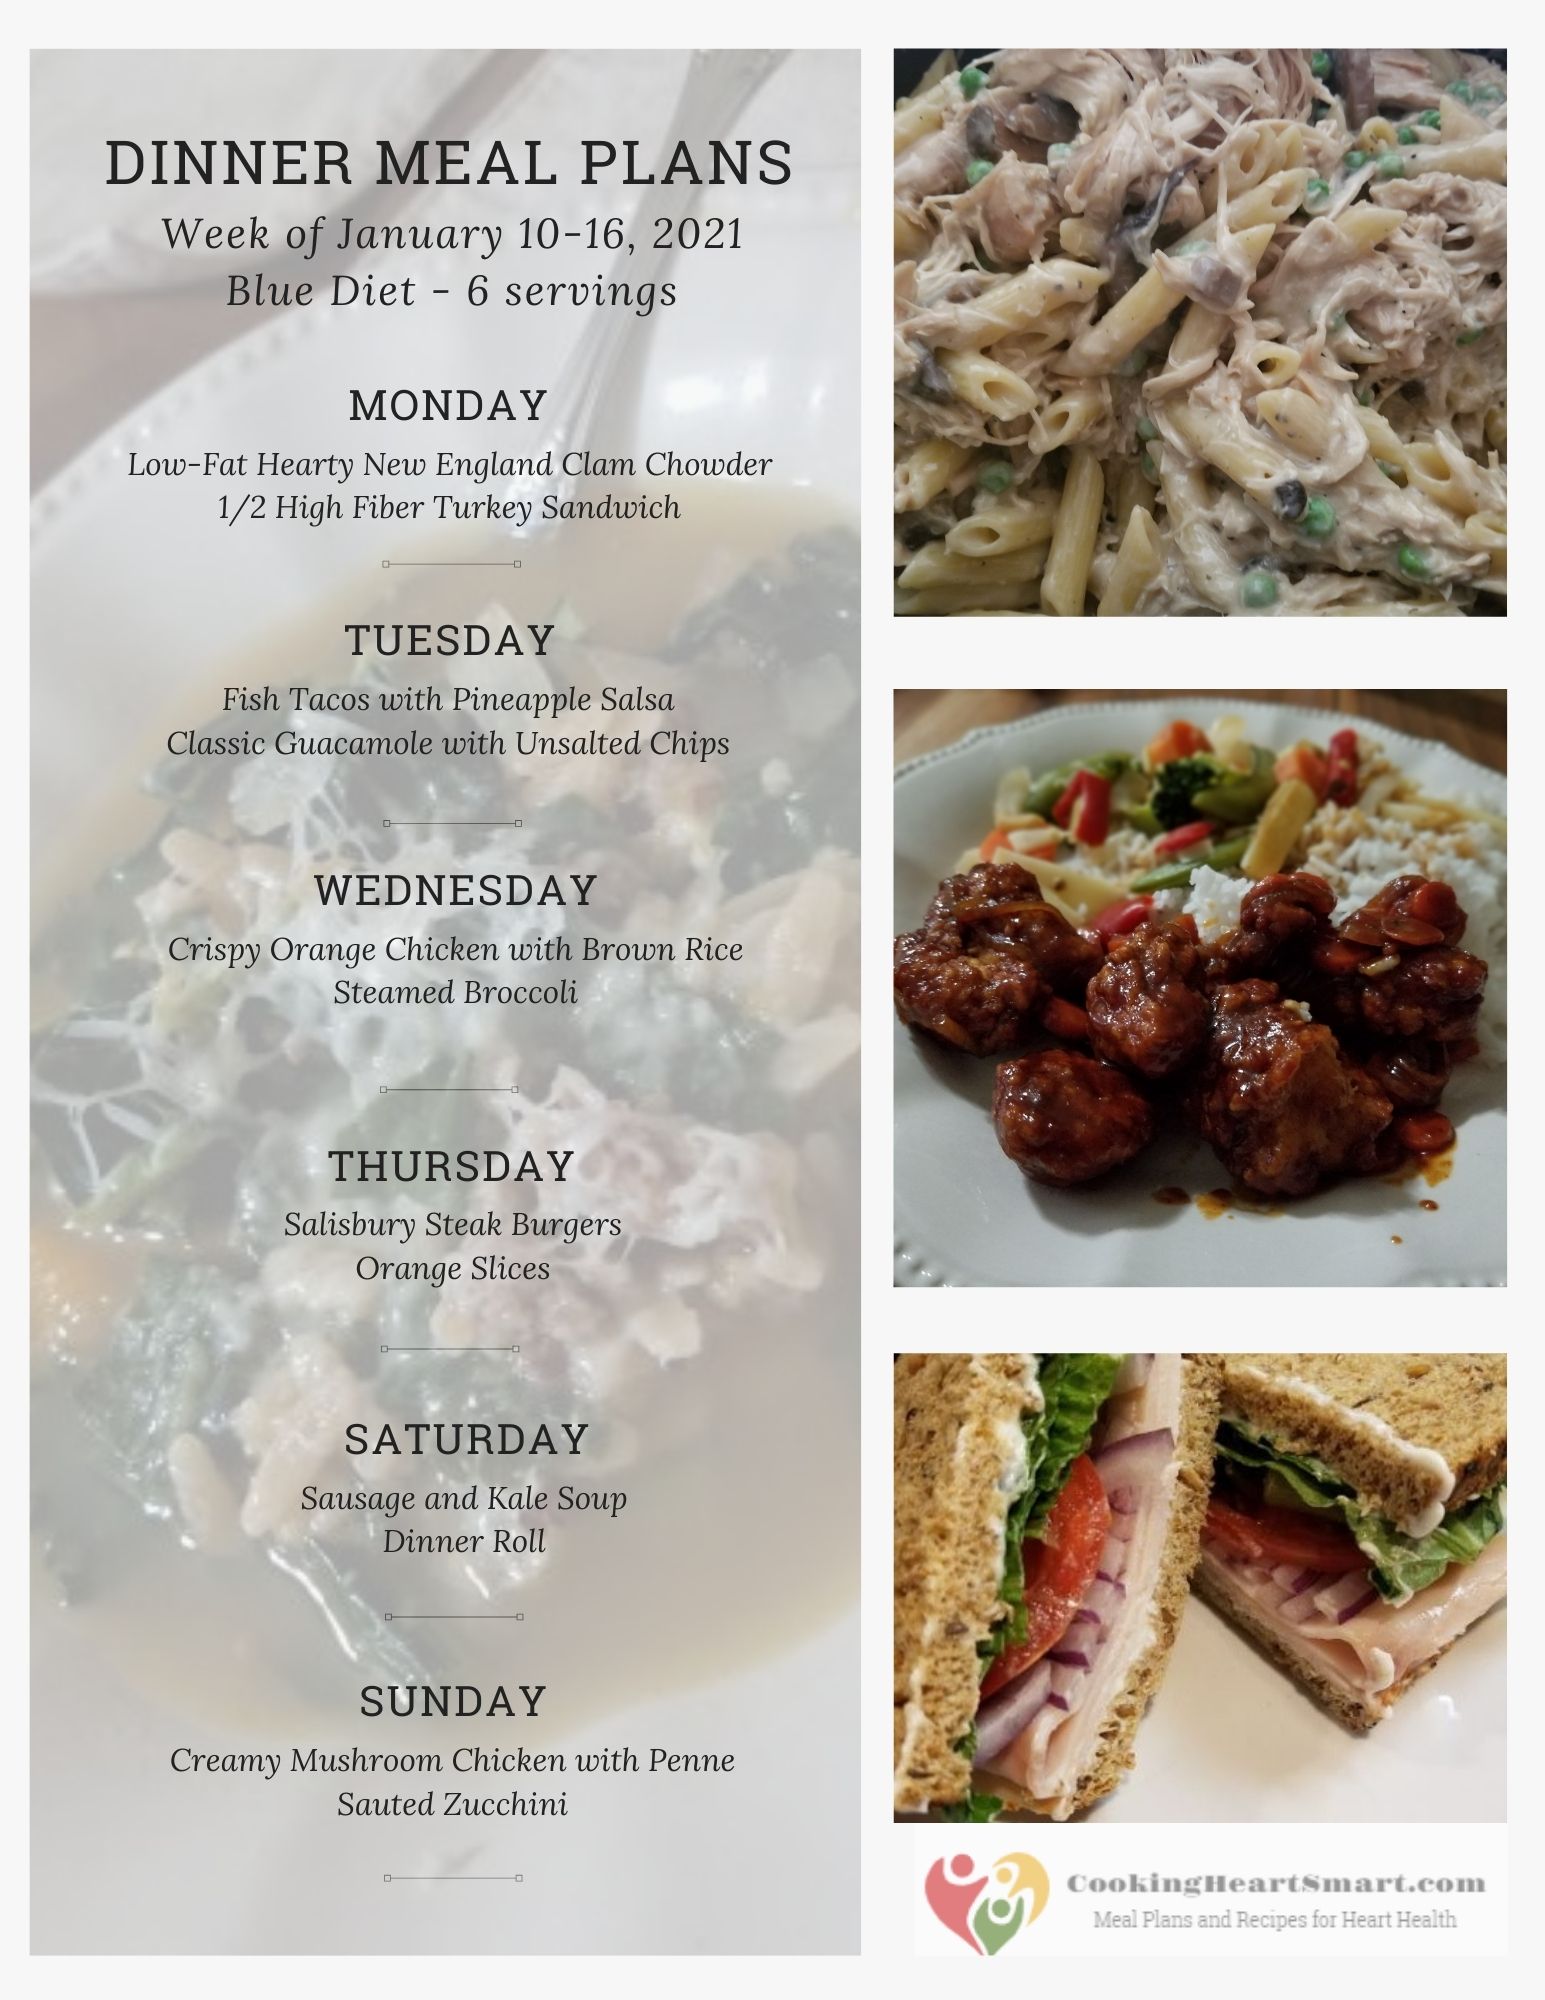 Cooking Heart Smart Weekly Meal Plan - January 10-16, 2021